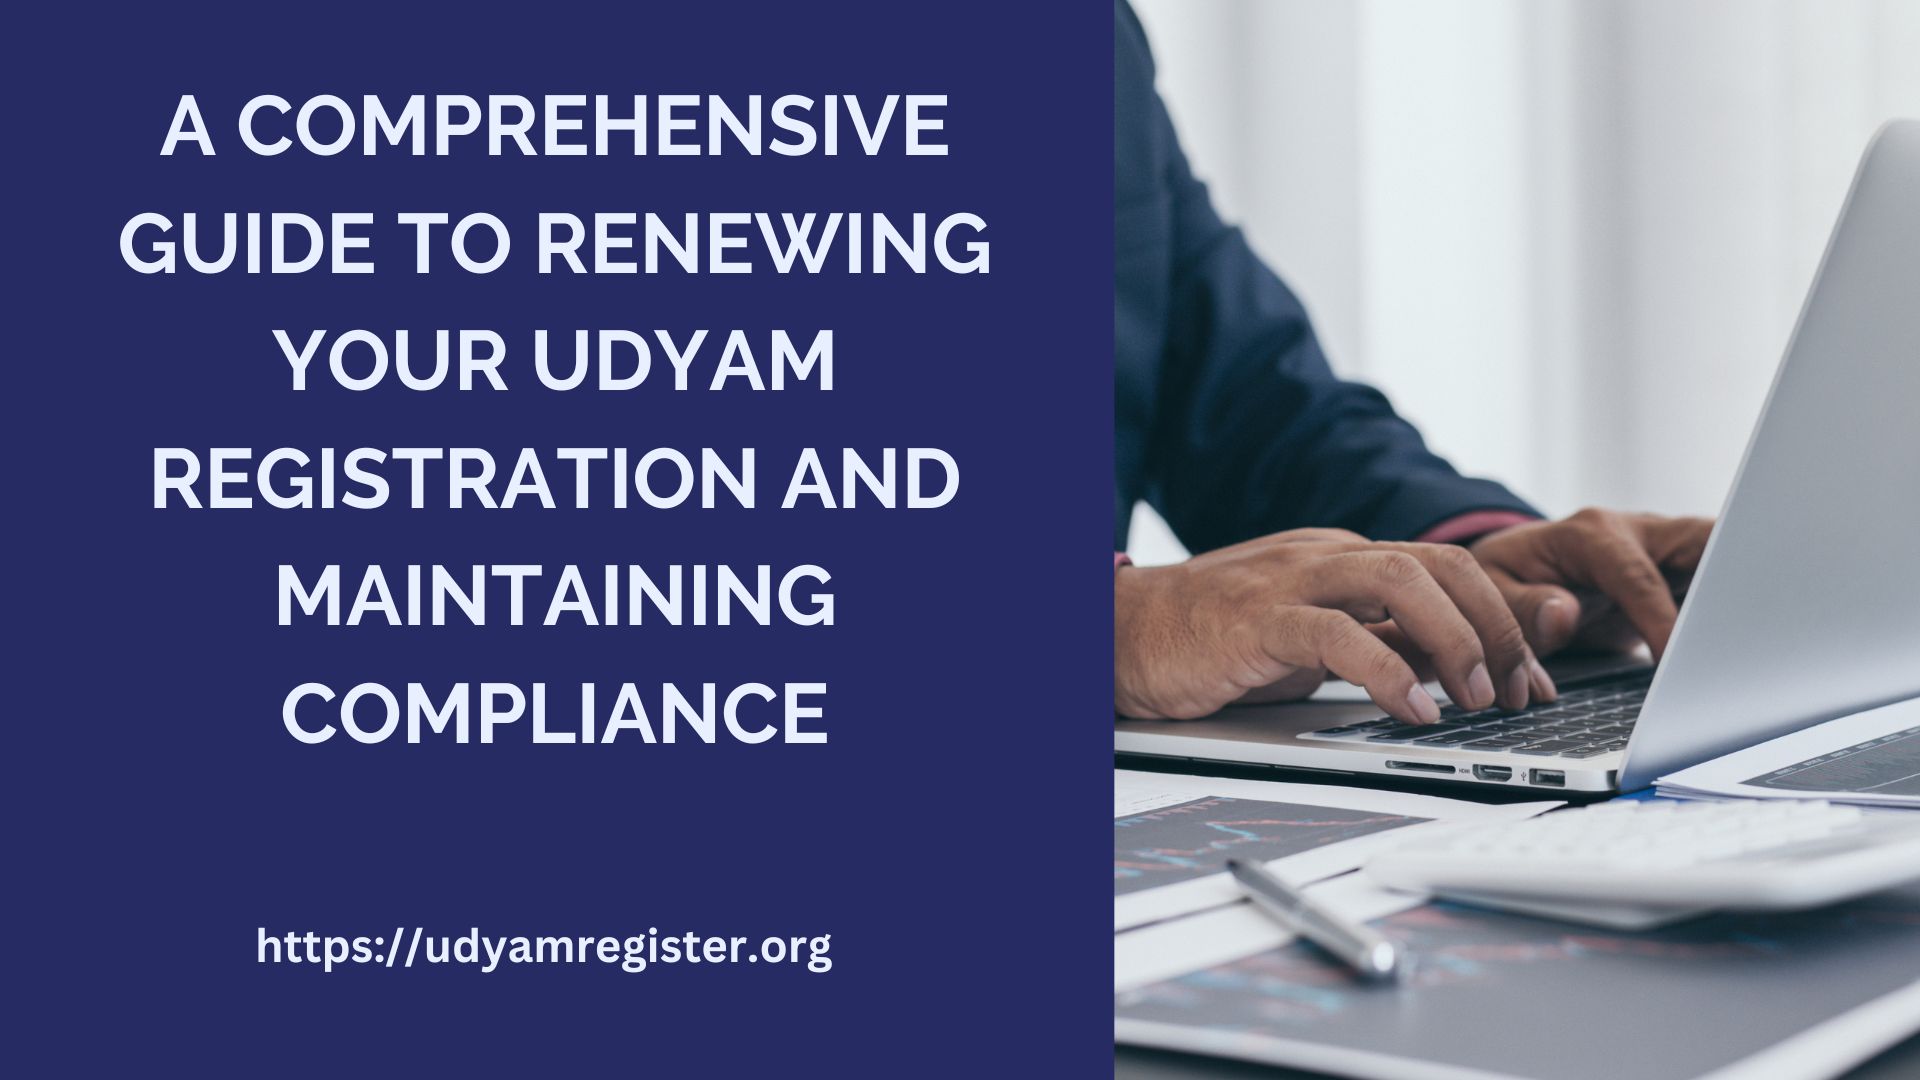 A Comprehensive Guide to Renewing Your Udyam Registration and Maintaining Compliance